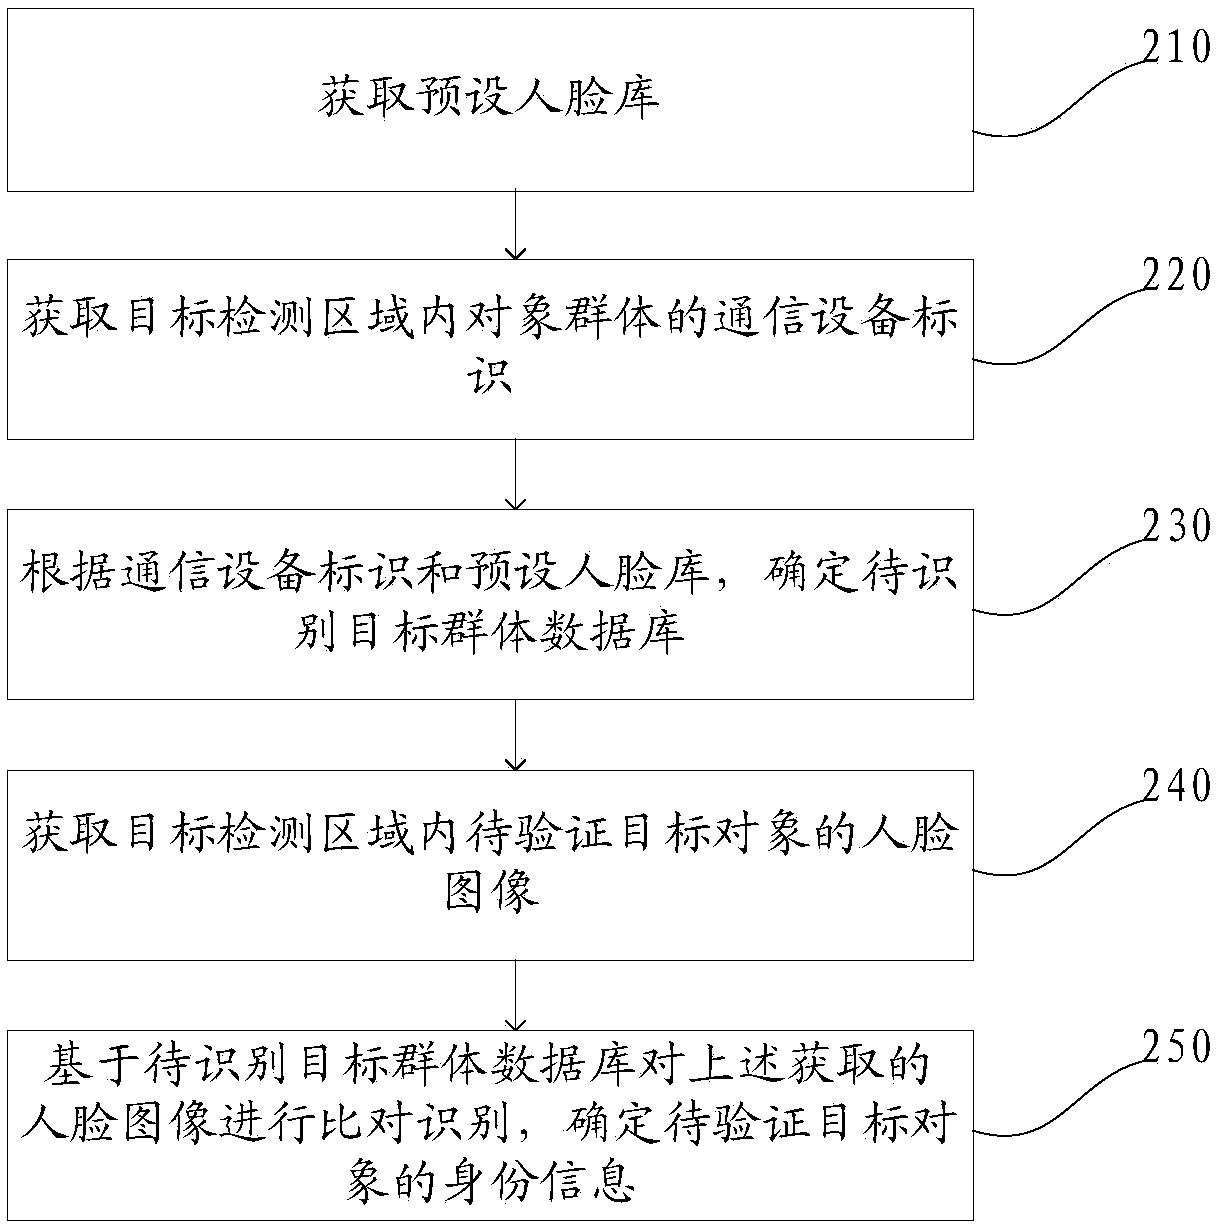 Face-recognition authentication method, device, and electronic device